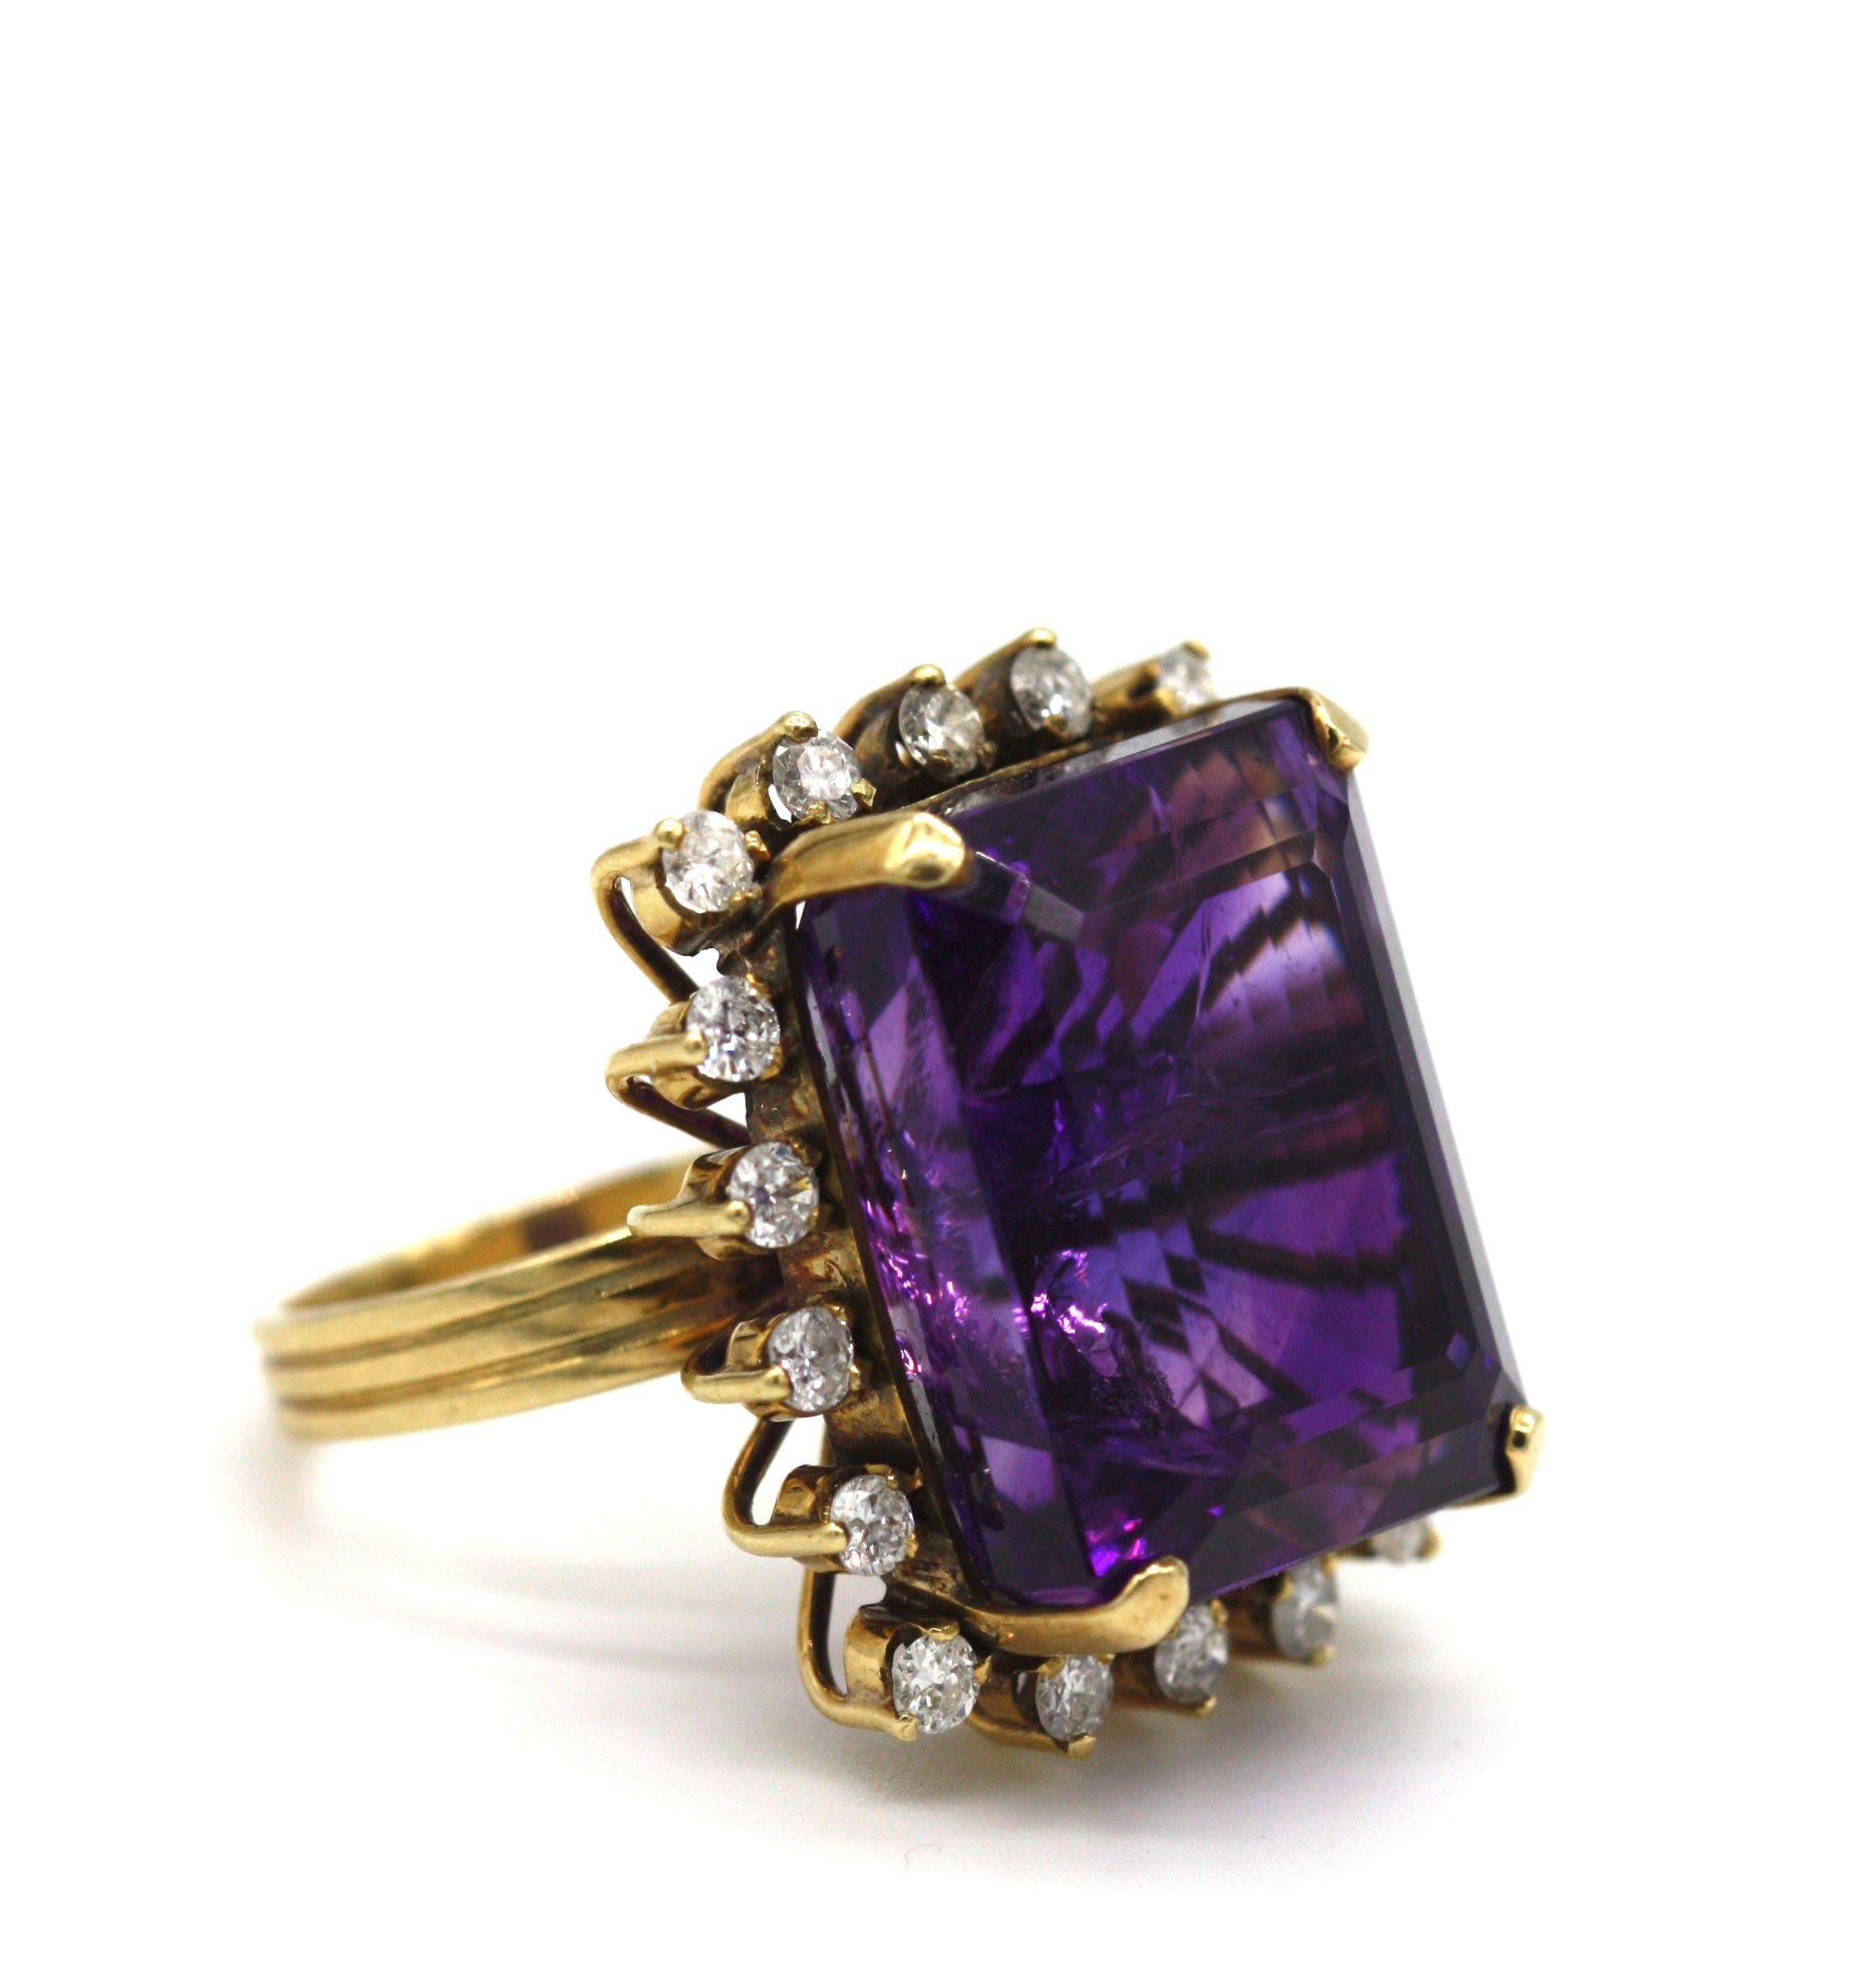 Diamond and Amethyst Ring
Centered with an emerald-cut amethyst measuring approximately 16 x 21 mm, surrounded by round cut diamonds weighing approximately 0.90 carats, mounted in 14 karat yellow gold, gross weight 16.4 grams, ring size 7.5